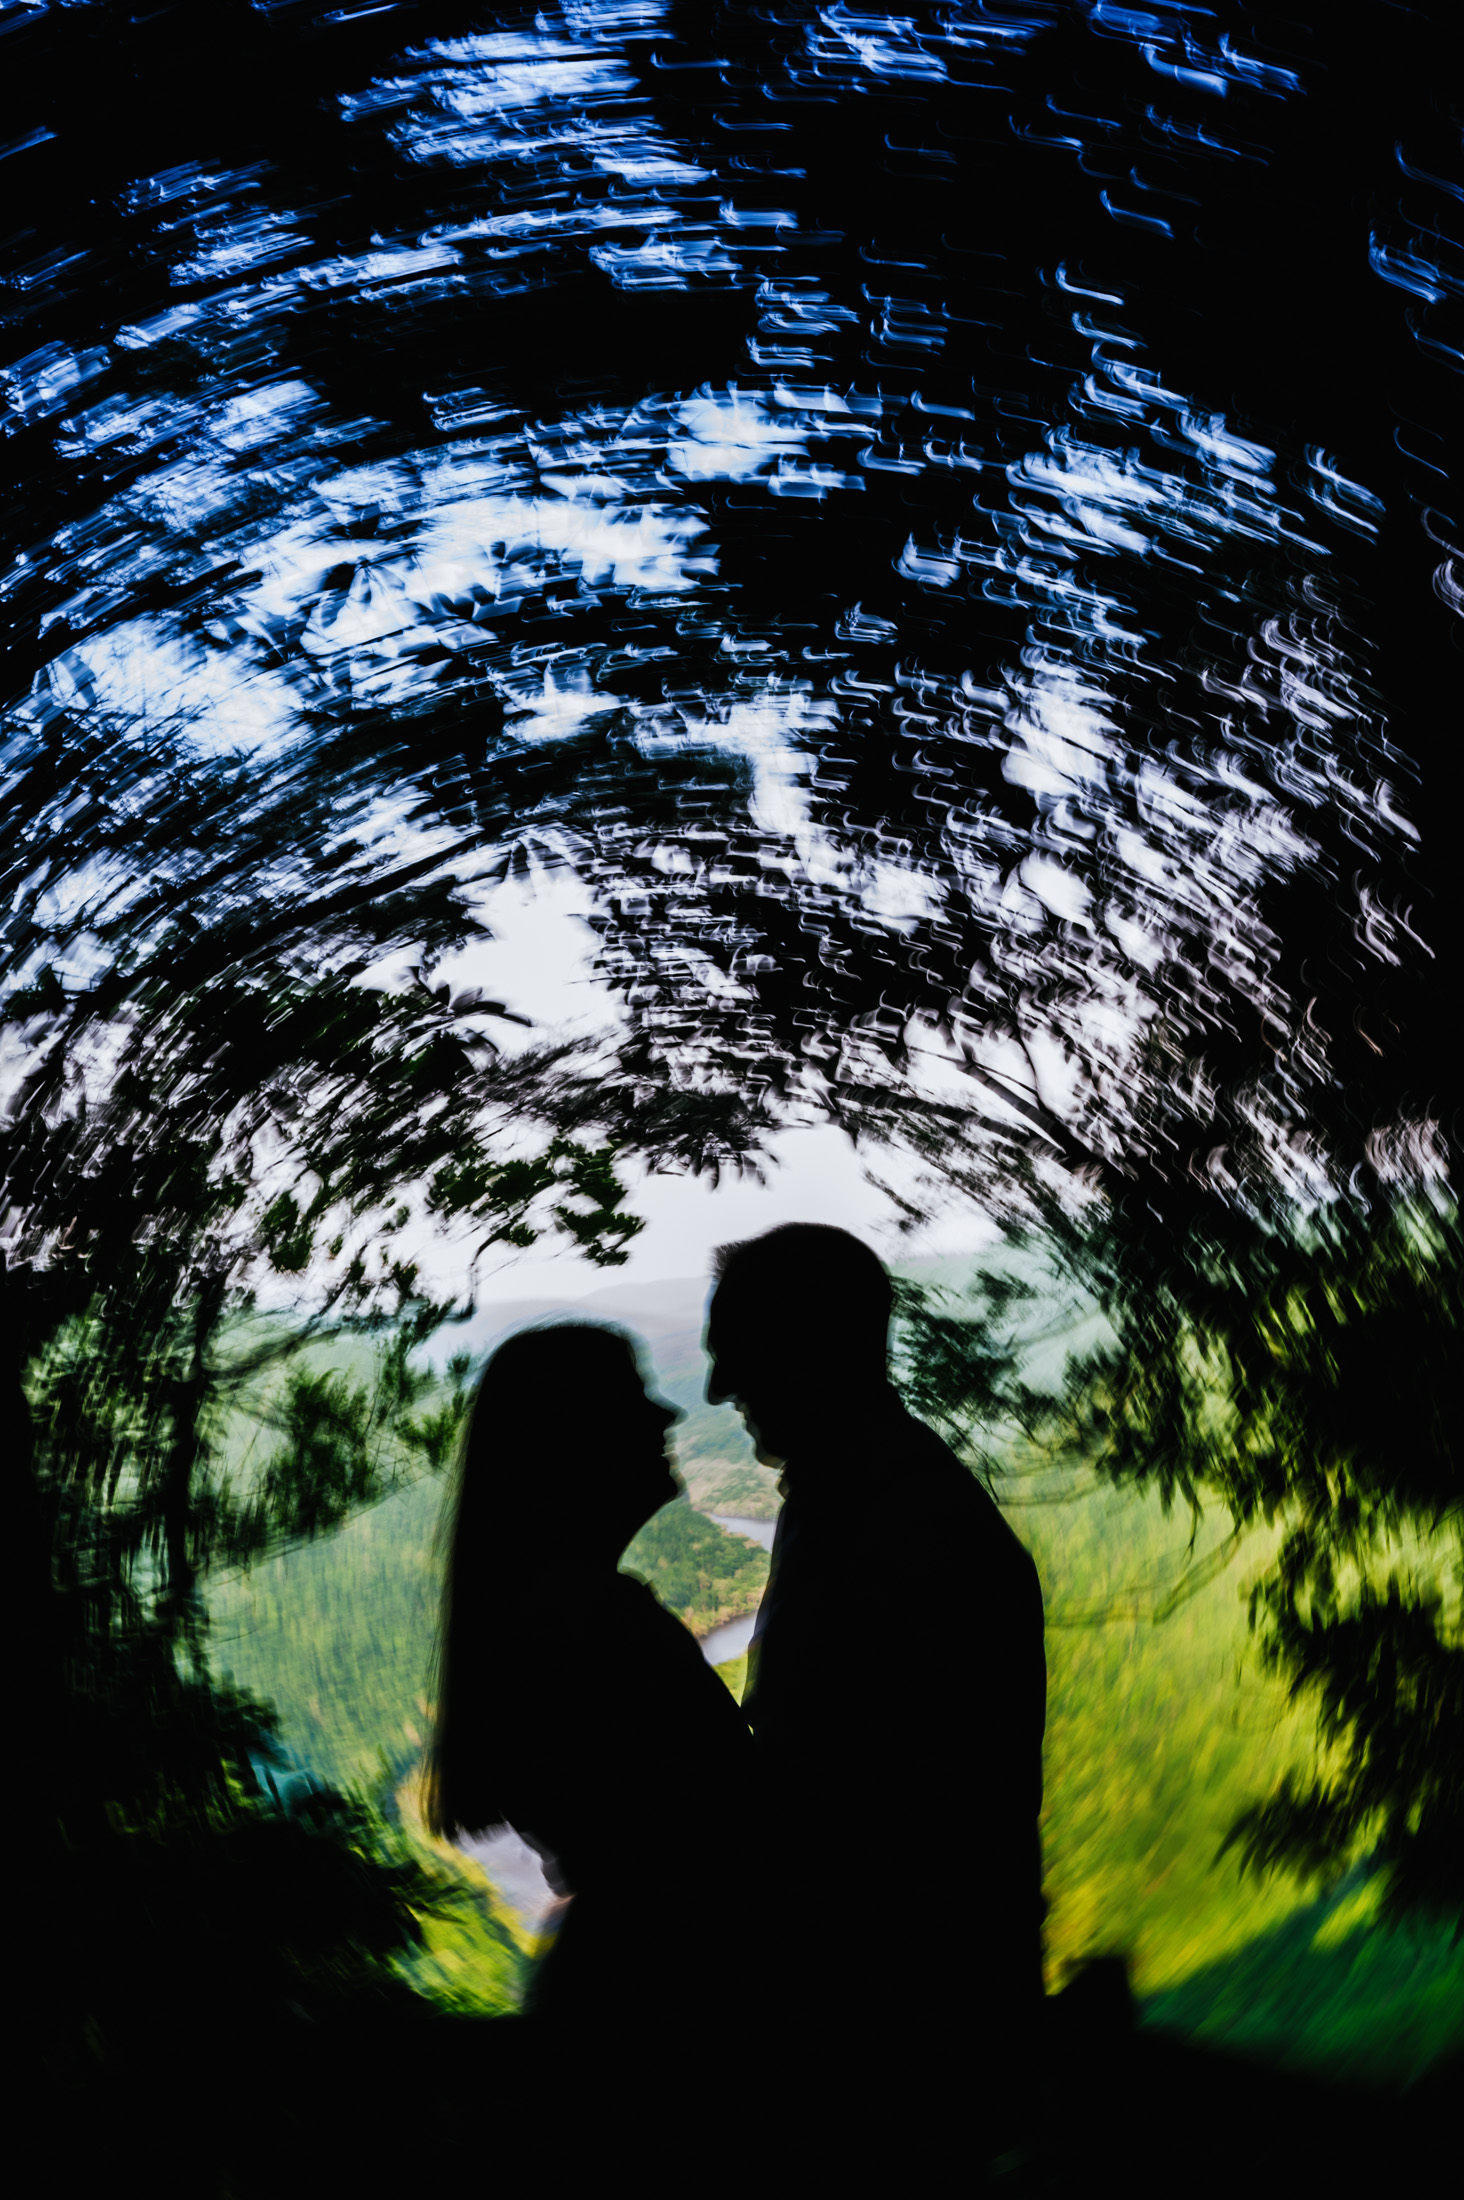 Silhouettes of a couple against a backdrop of trees and sky.